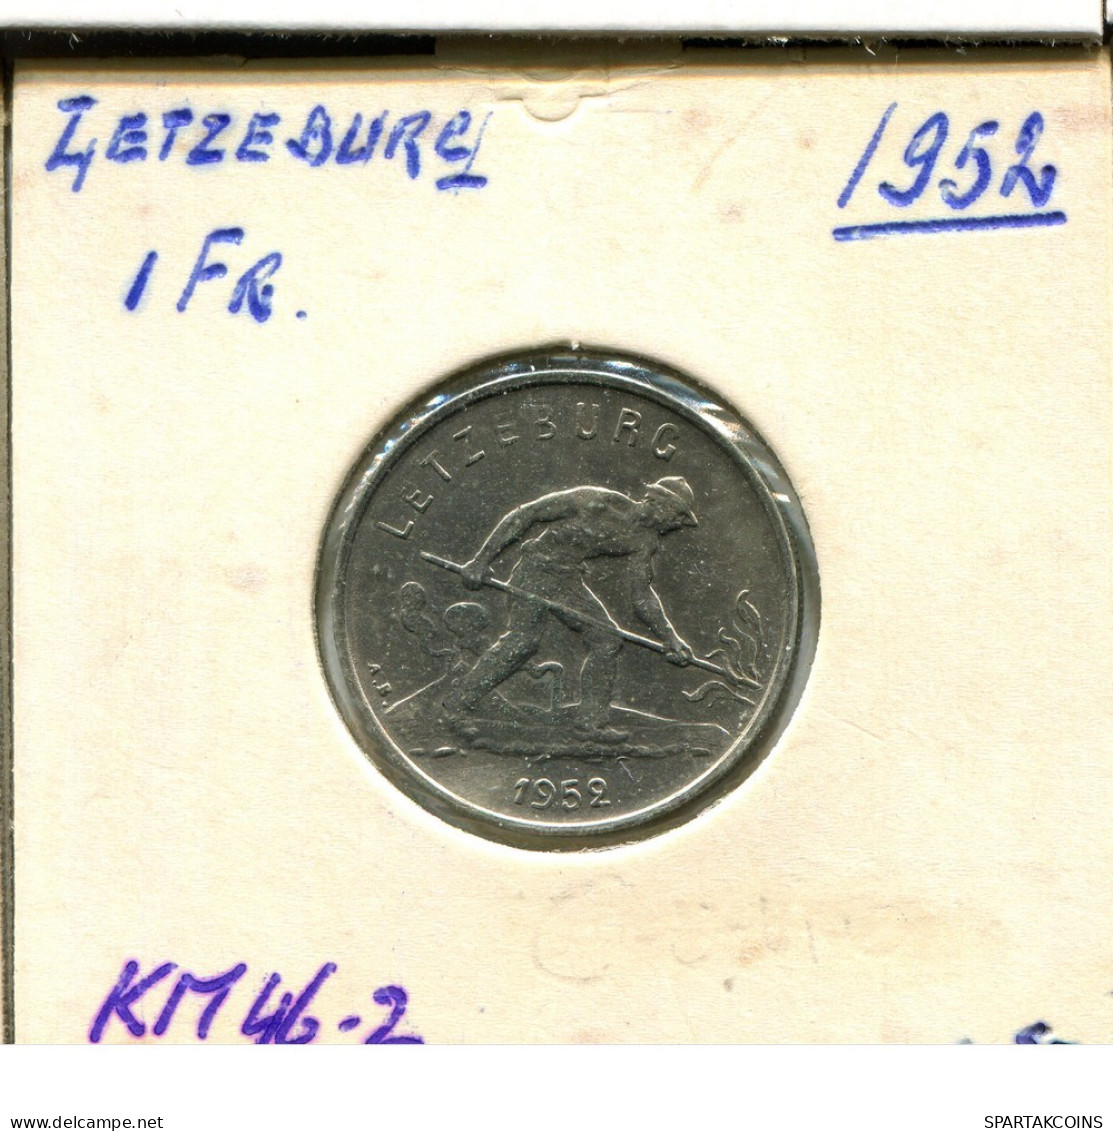 1 FRANC 1952 LUXEMBOURG Coin #AT202.U.A - Luxemburgo